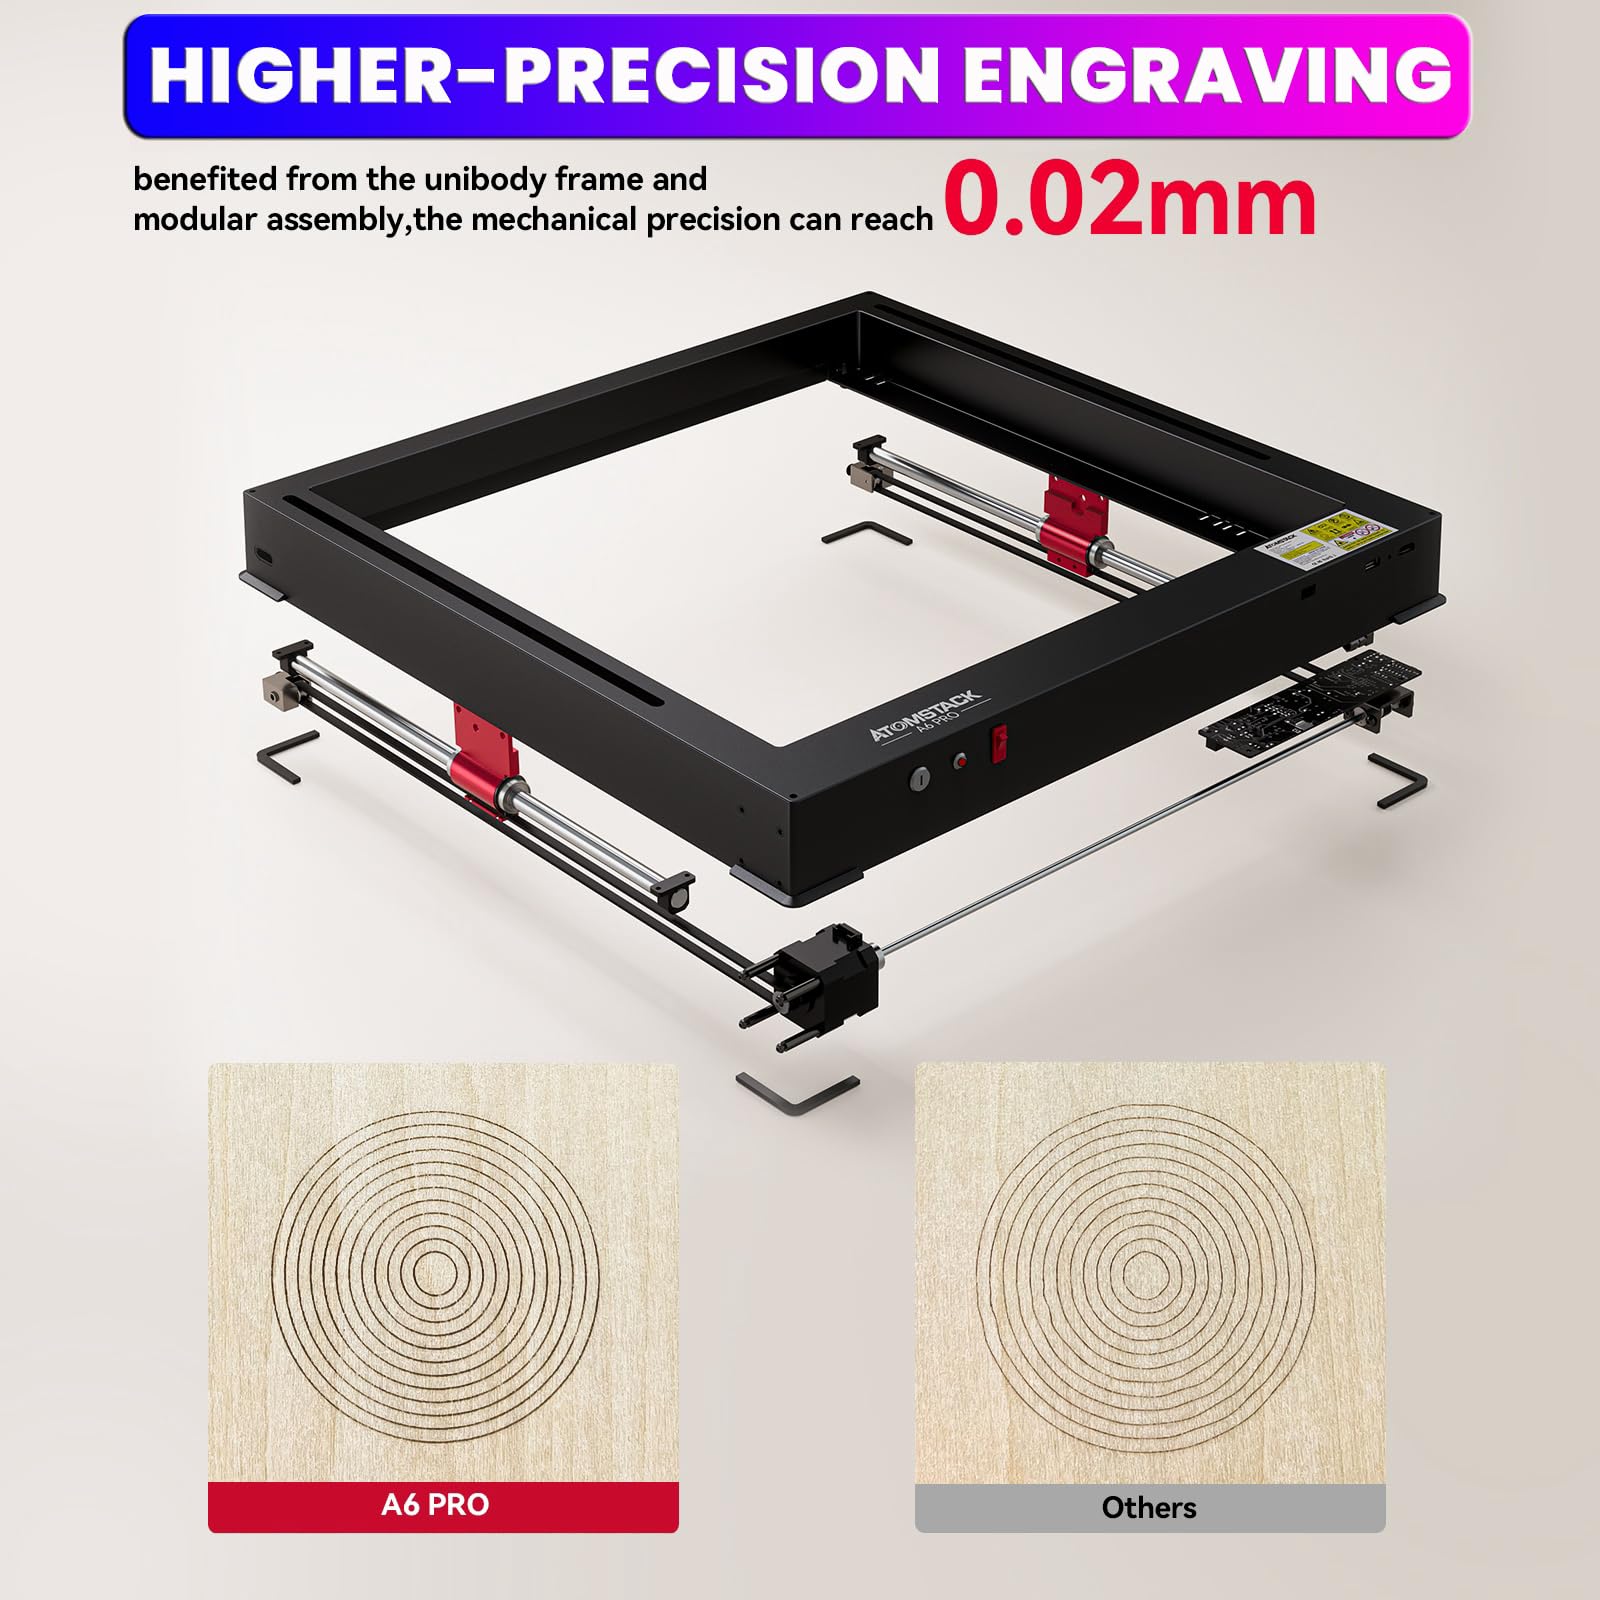 ATOMSTACK A6 Pro Laser Engraver for Beginners, Unibody Frame No Assembly Required, 6W Output Power Laser Engraving and Cutting Machine, Higher Accuracy Laser Cutter for Wood, Acrylic, Leather, etc.